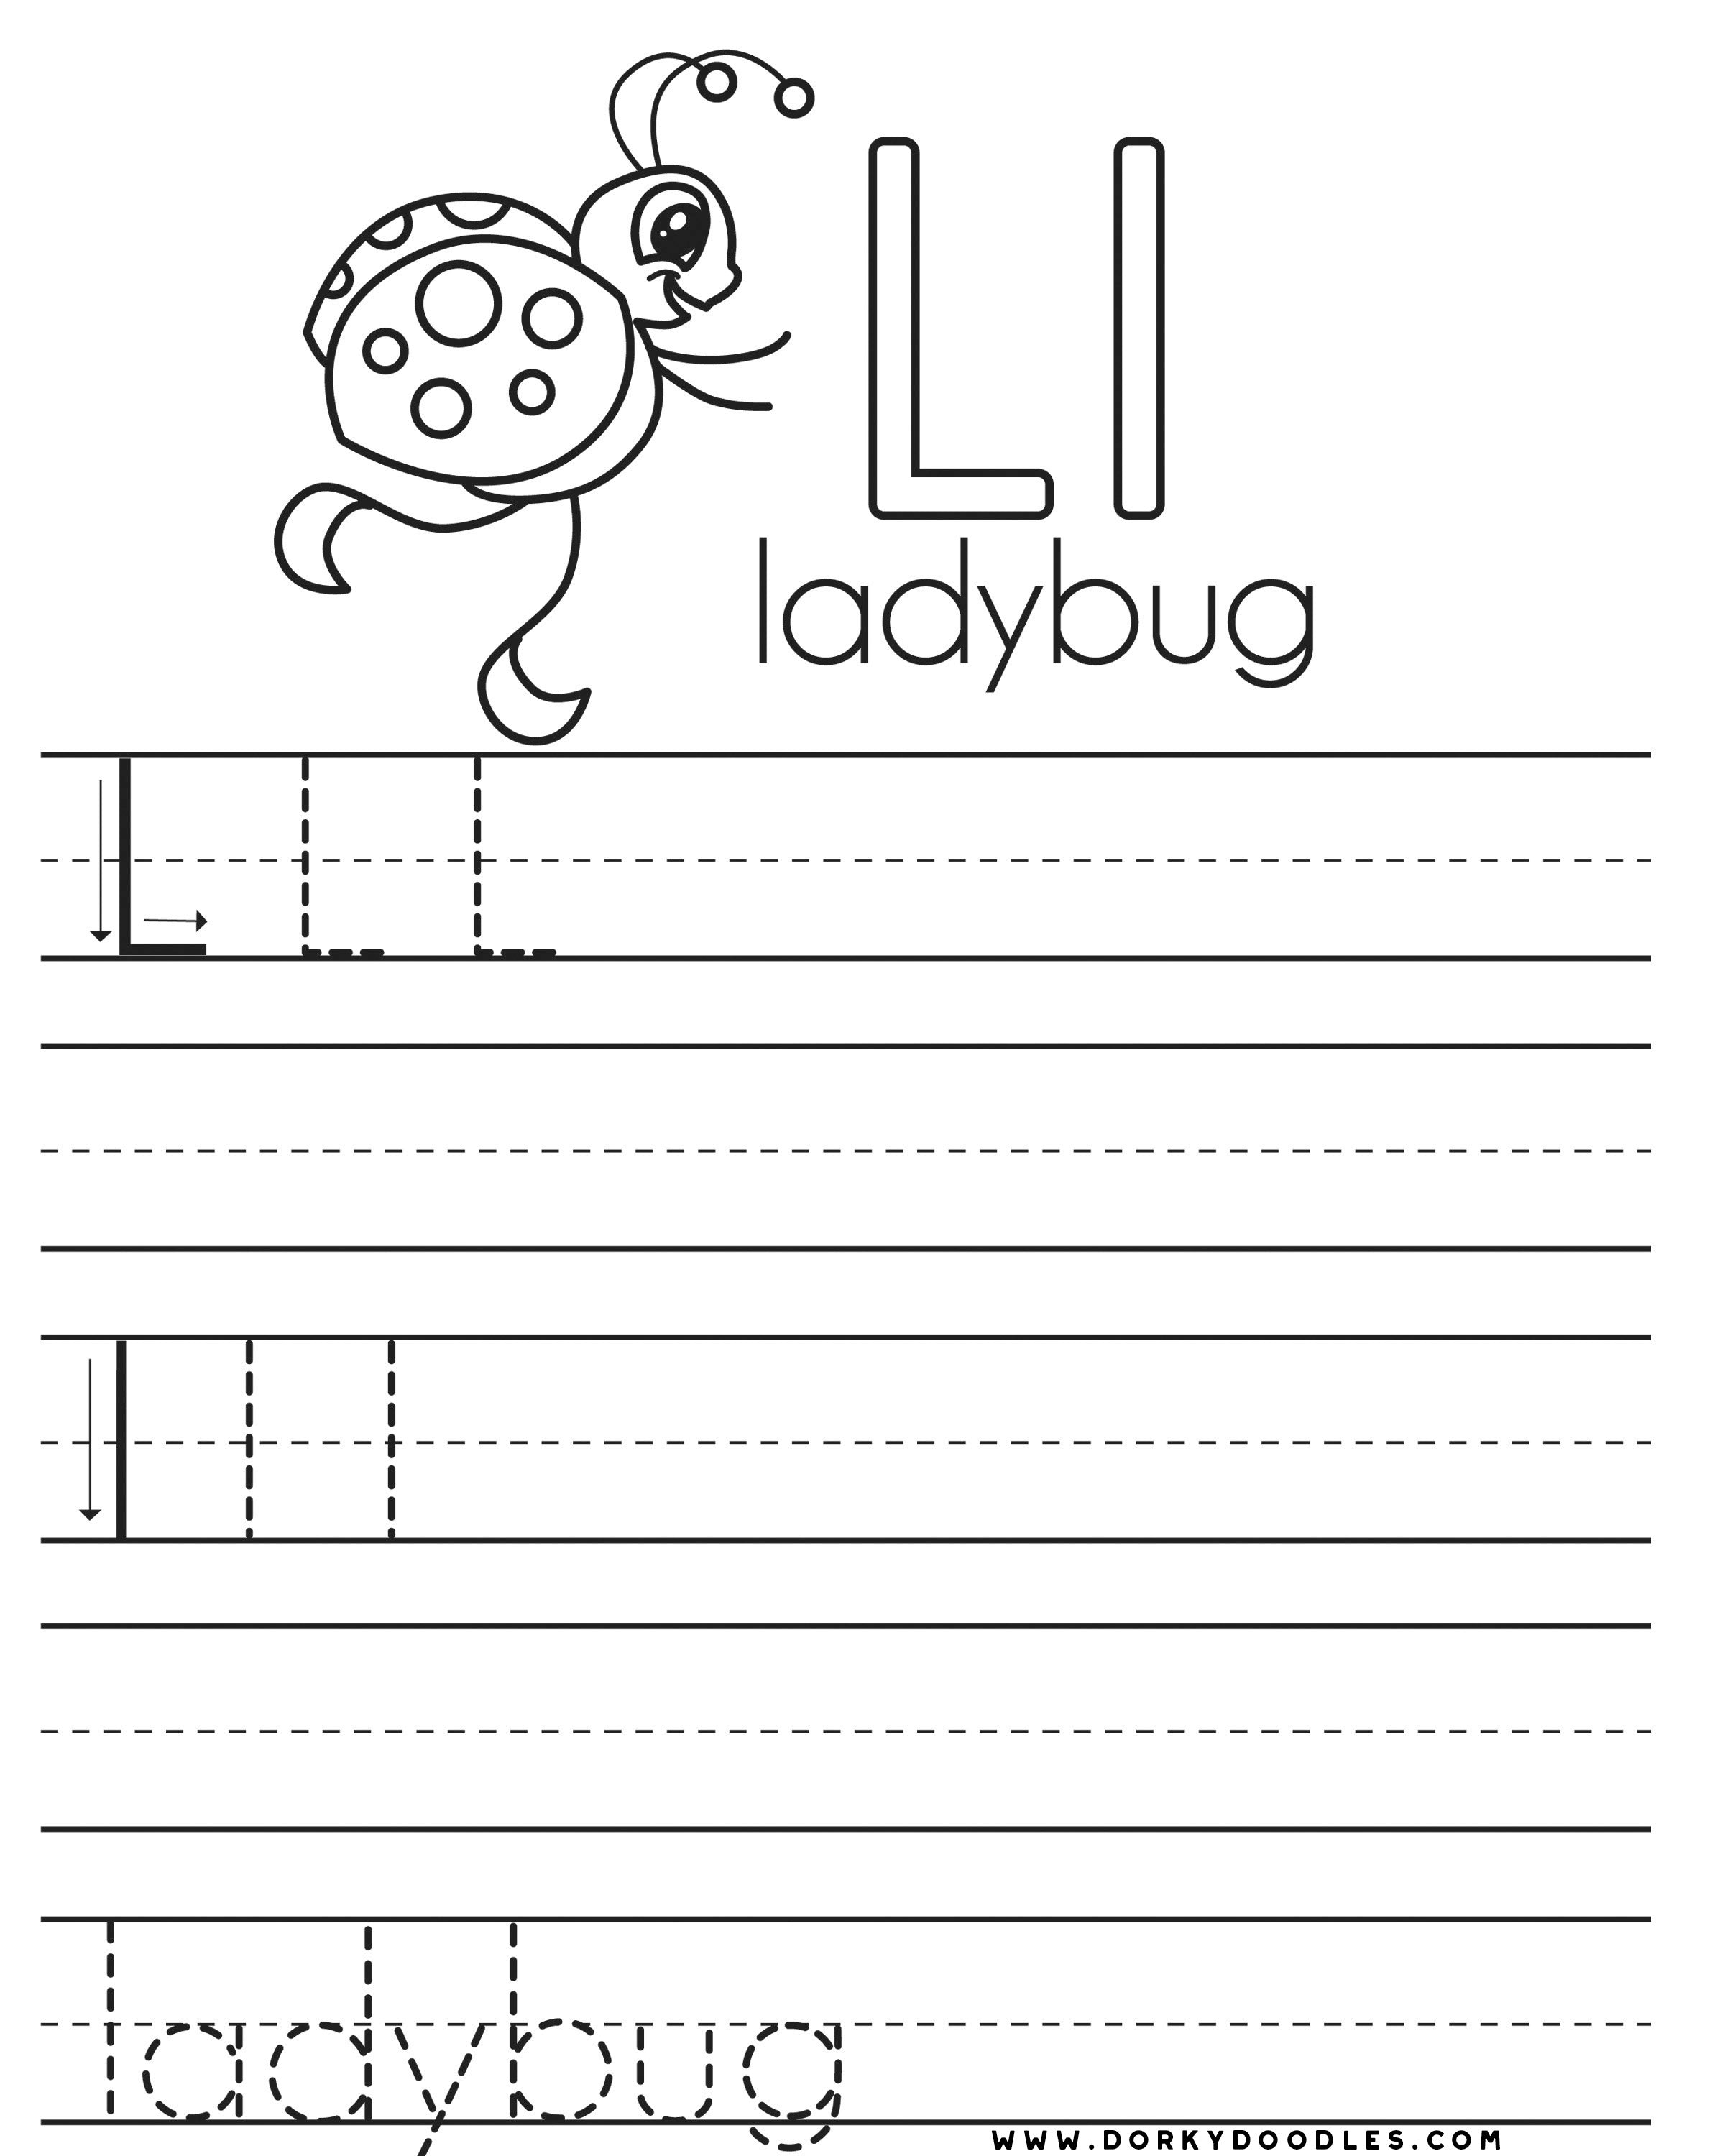 writing-the-letter-l-worksheets-free-download-gambr-co